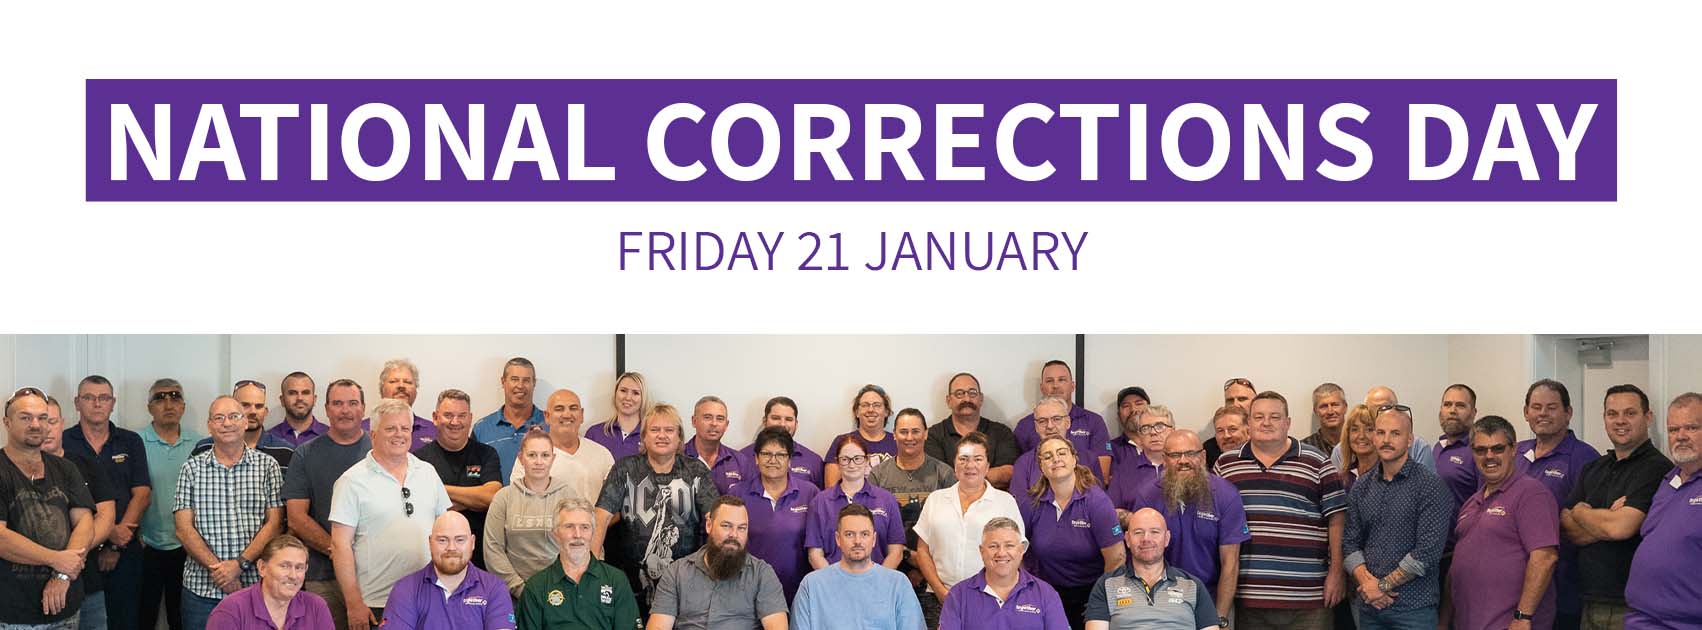 220121 National Corrections Day FB Cover